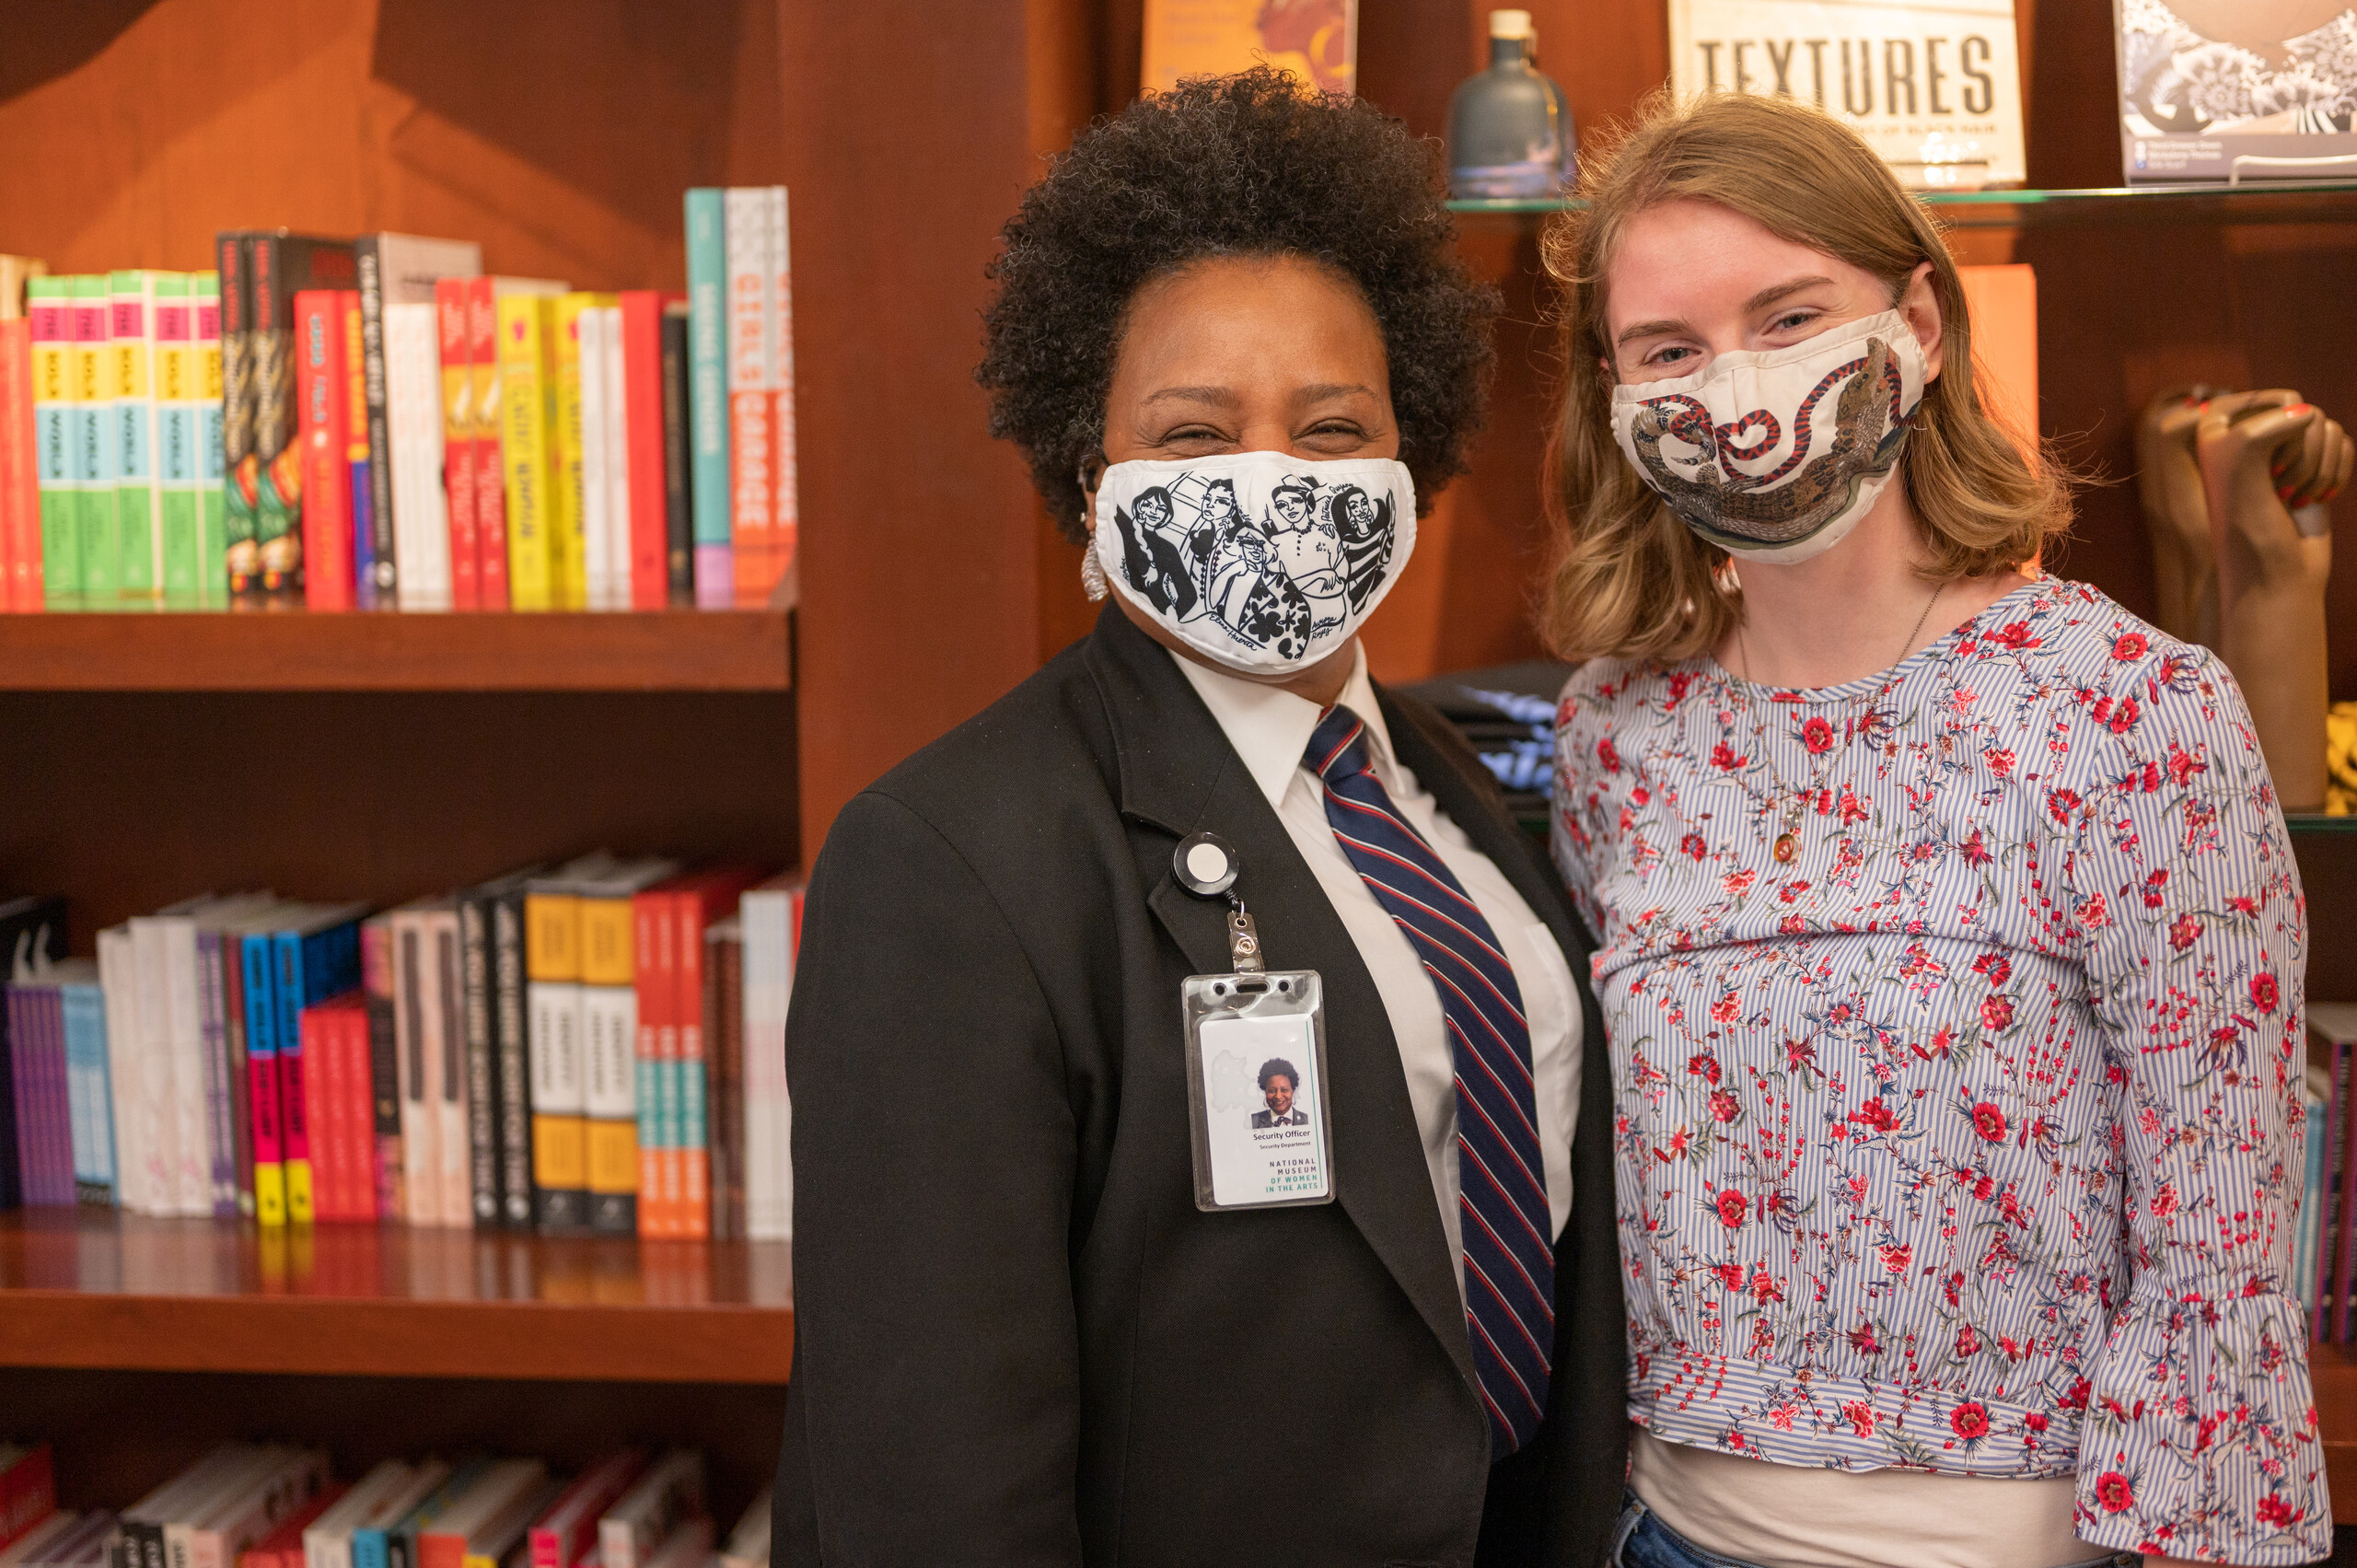 A dark-skinned woman with a short afro and a light-skinned woman with strawberry-blonde shoulder-length hair pose together in front of wooden bookshelves. They both smile behind face masks featuring artsy illustrations.